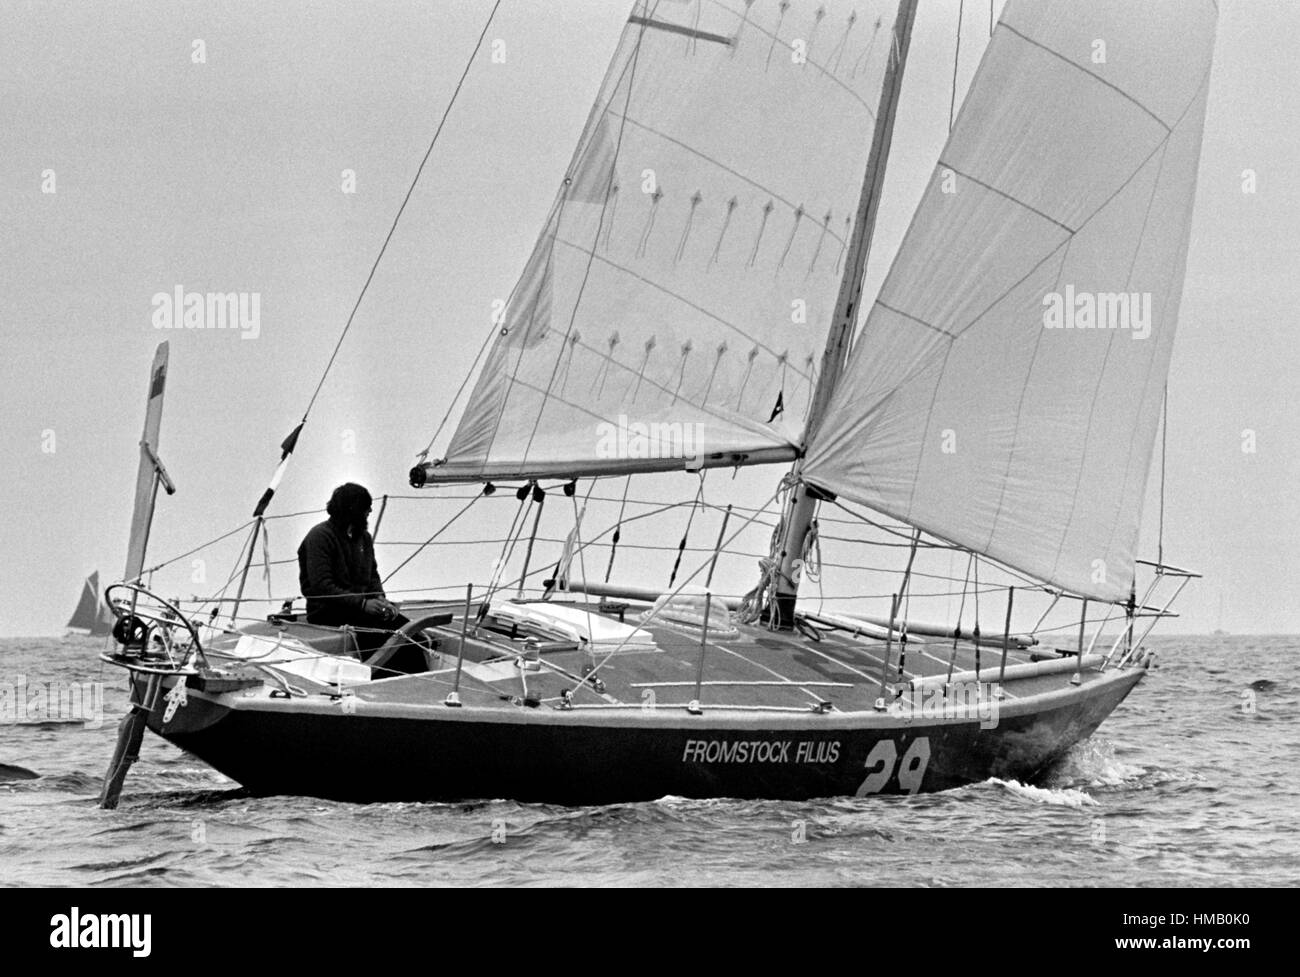 AJAXNETPHOTO. 6TH JUNE, 1976. PLYMOUTH, ENGLAND. - OSTAR 1976 - FROMSTOCK FILIUS SKIPPERED BY PHILIP HOWELLS PLACED 35TH OVERALL AND 22ND IN CLASS.   PHOTO:JONATHAN EASTLAND/AJAX REF:2760506 22 Stock Photo